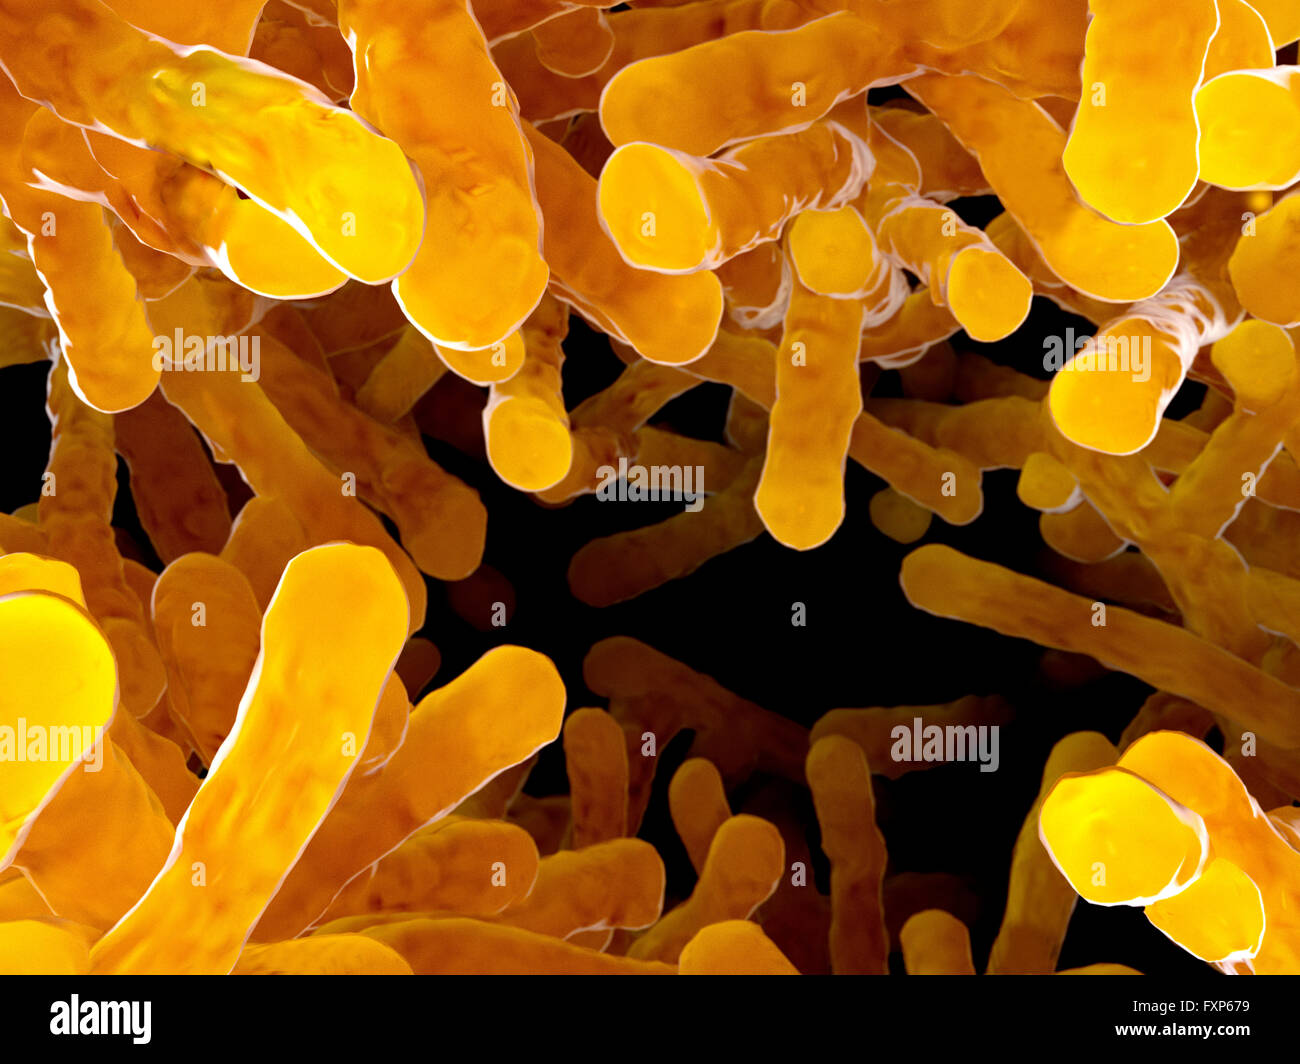 Bacteria. Illustration of a colony of bacilli, rod-shaped bacteria. Bacteria  are prokaryotic microorganisms with a diversity of shapes ranging from  spheres to rods and spirals. Examples of bacilli are Bacillus anthracis  (causes